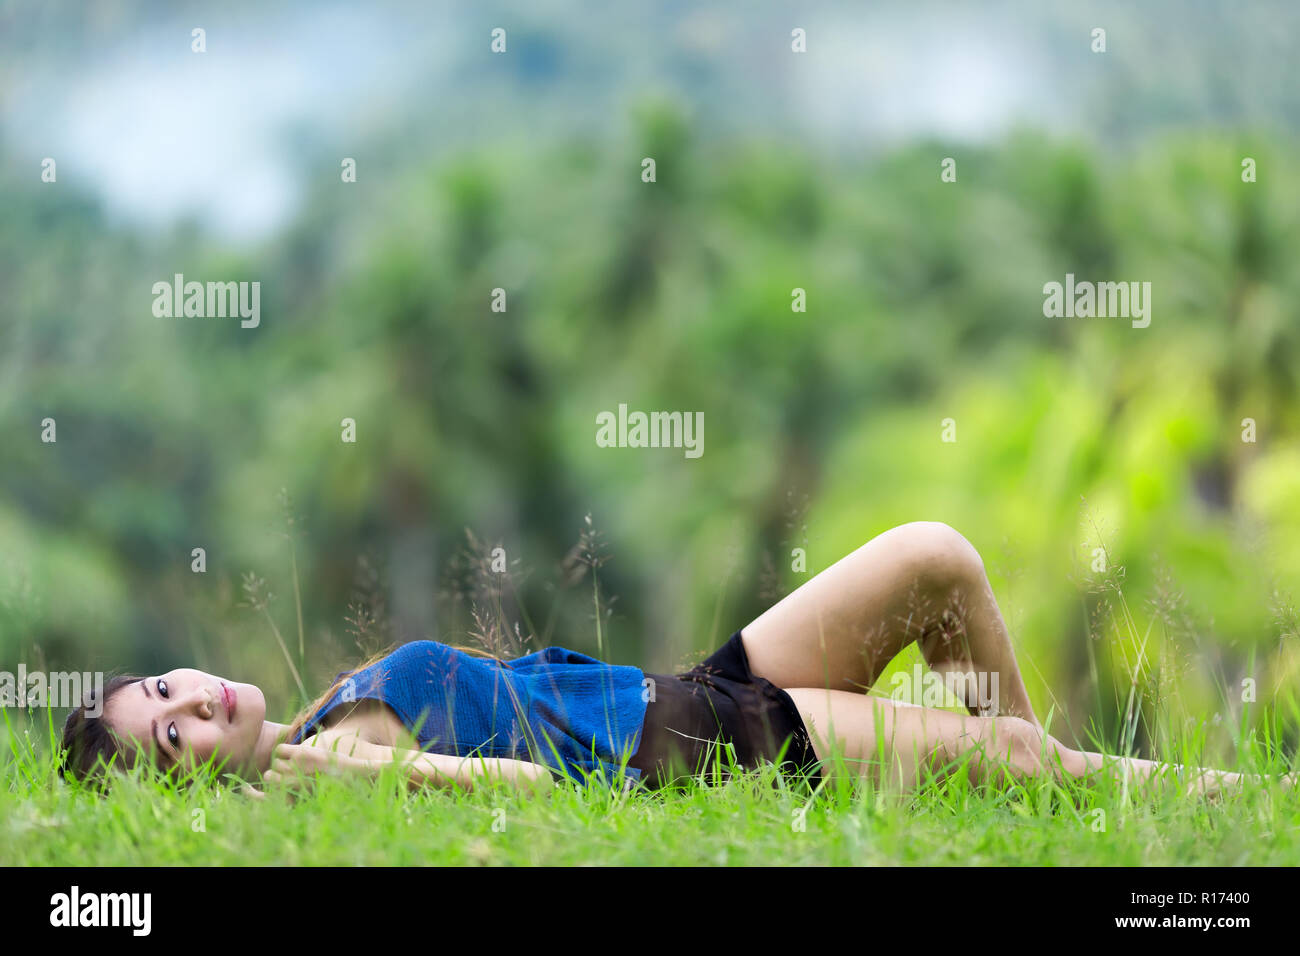 Beautiiful young Filipina woman relaxing on green grass lying on her back in a lush green park looking at the camera with a serene smile Stock Photo